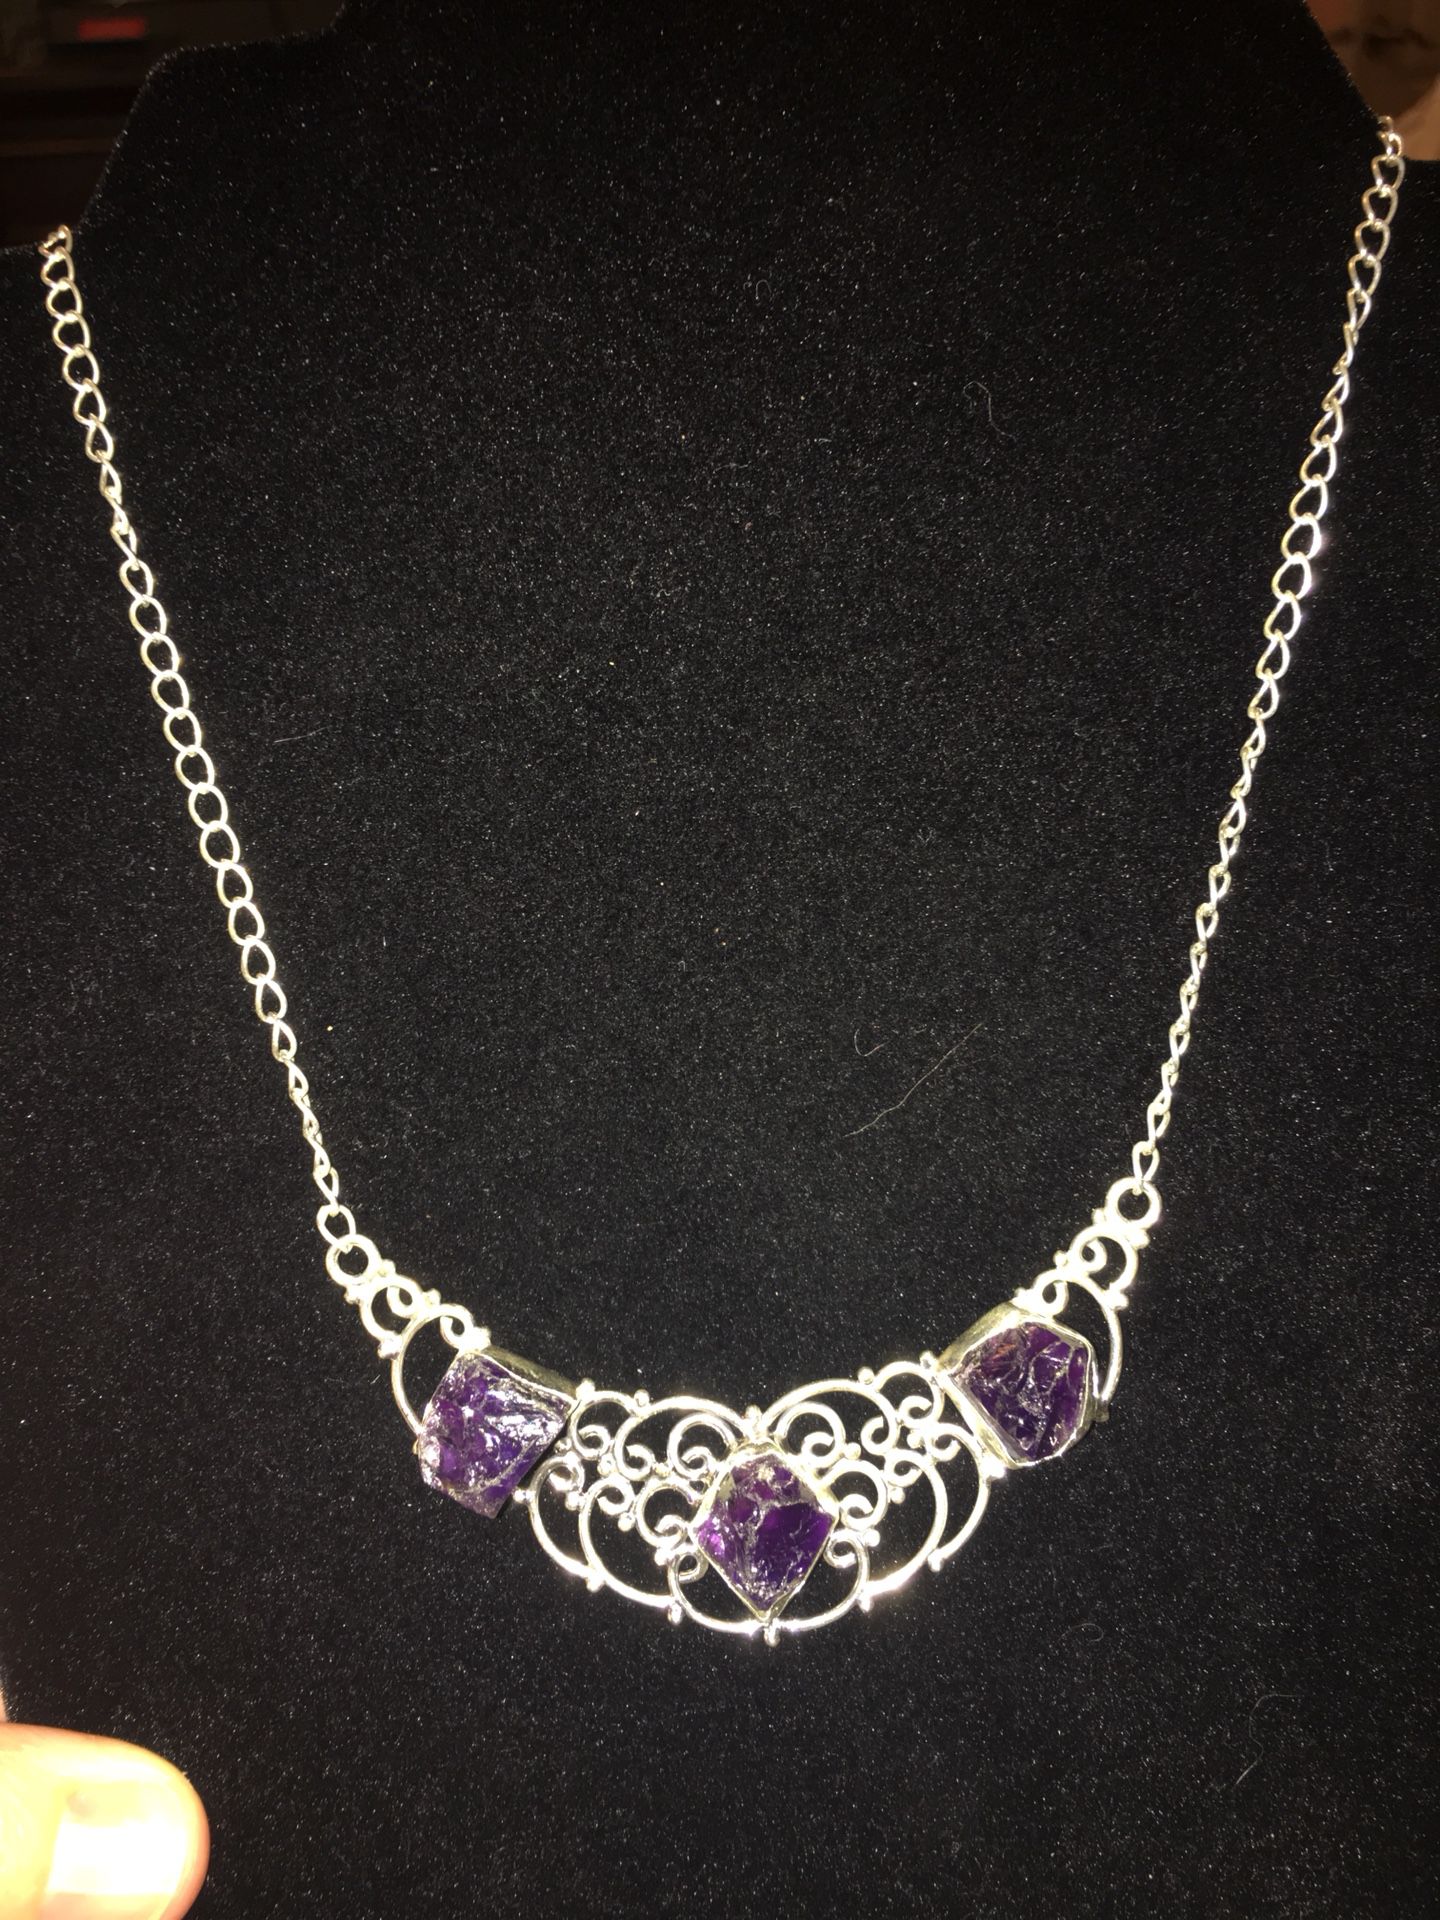 Gorgeous amethyst & sterling silver necklace